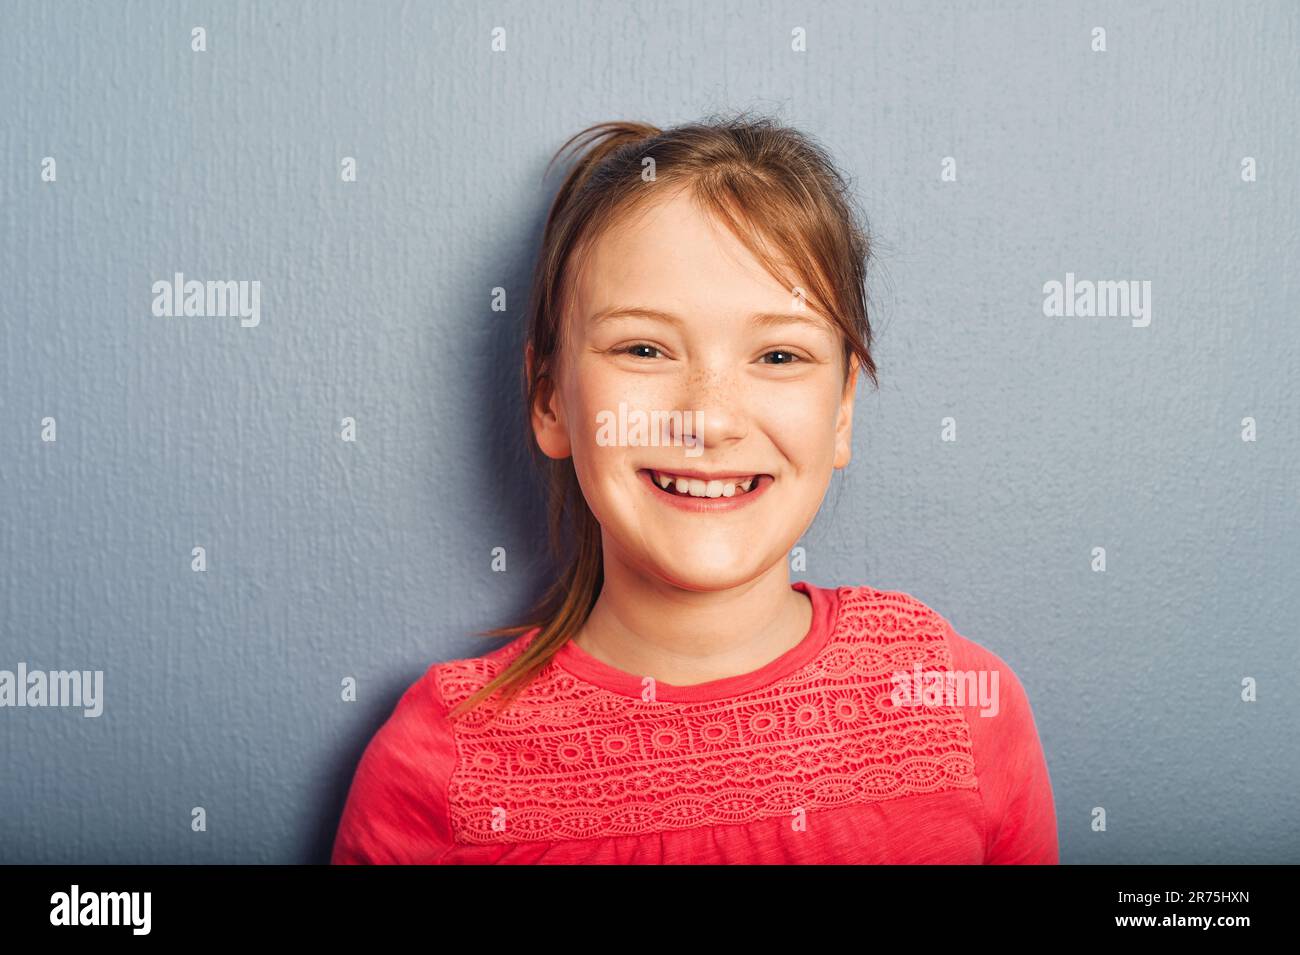 Portrait of young preteen 9-10 year old girl wearing pink top, standing against blue purple background Stock Photo